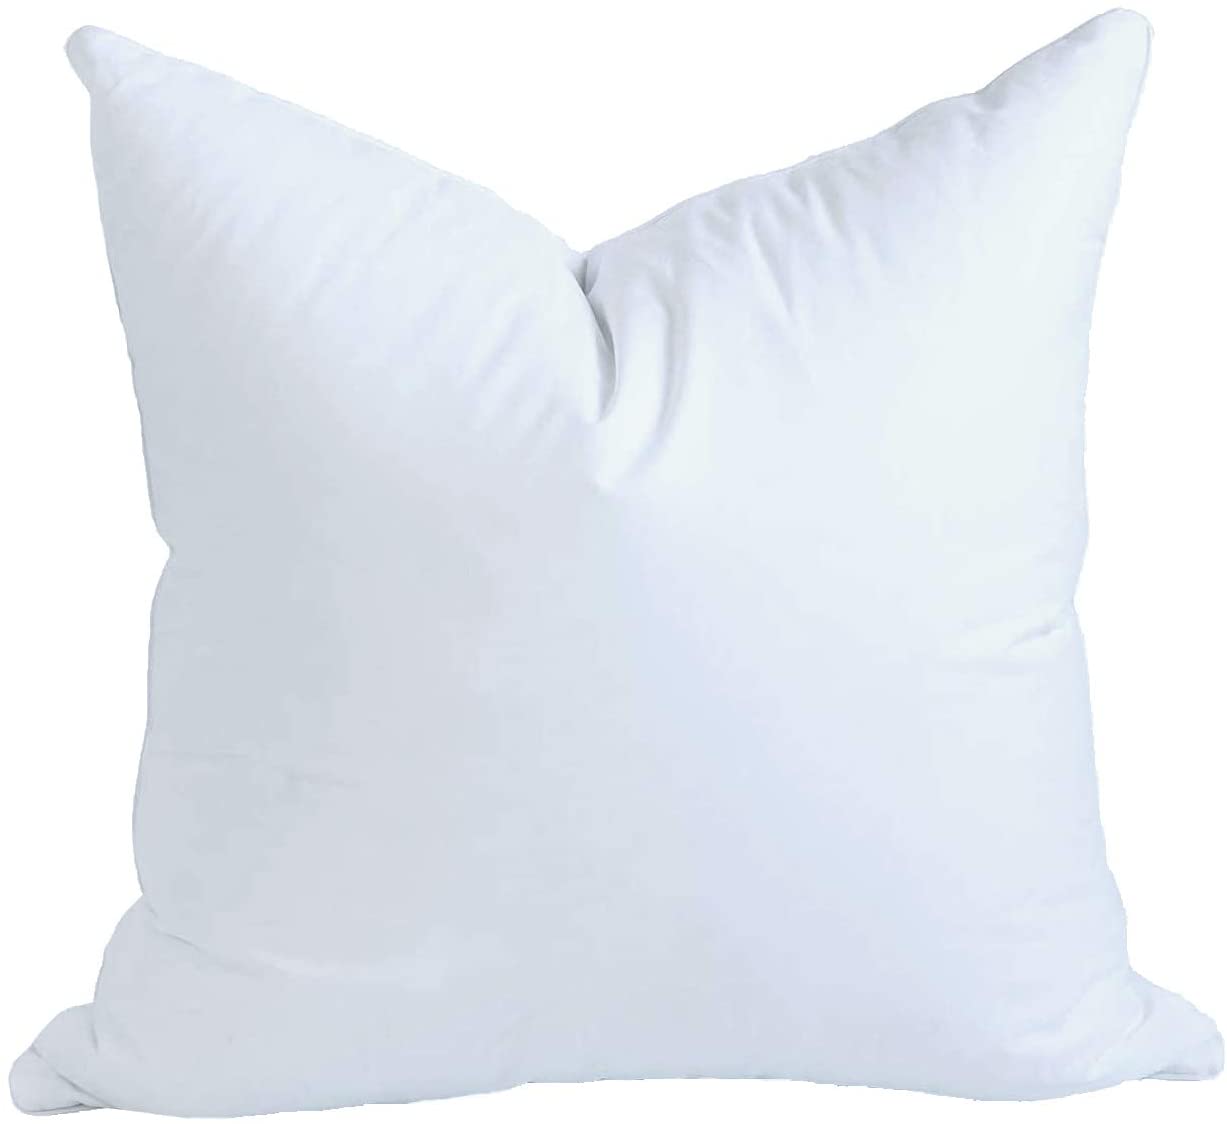 A synthetic down pillow is a type of pillow designed to mimic the feel of traditional down pillows while offering hypoallergenic benefits and often being more affordable. Unlike natural down, which is made from the soft undercoating of ducks or geese, synthetic down is made from polyester fibers that are engineered to closely resemble the loftiness and resilience of natural down.